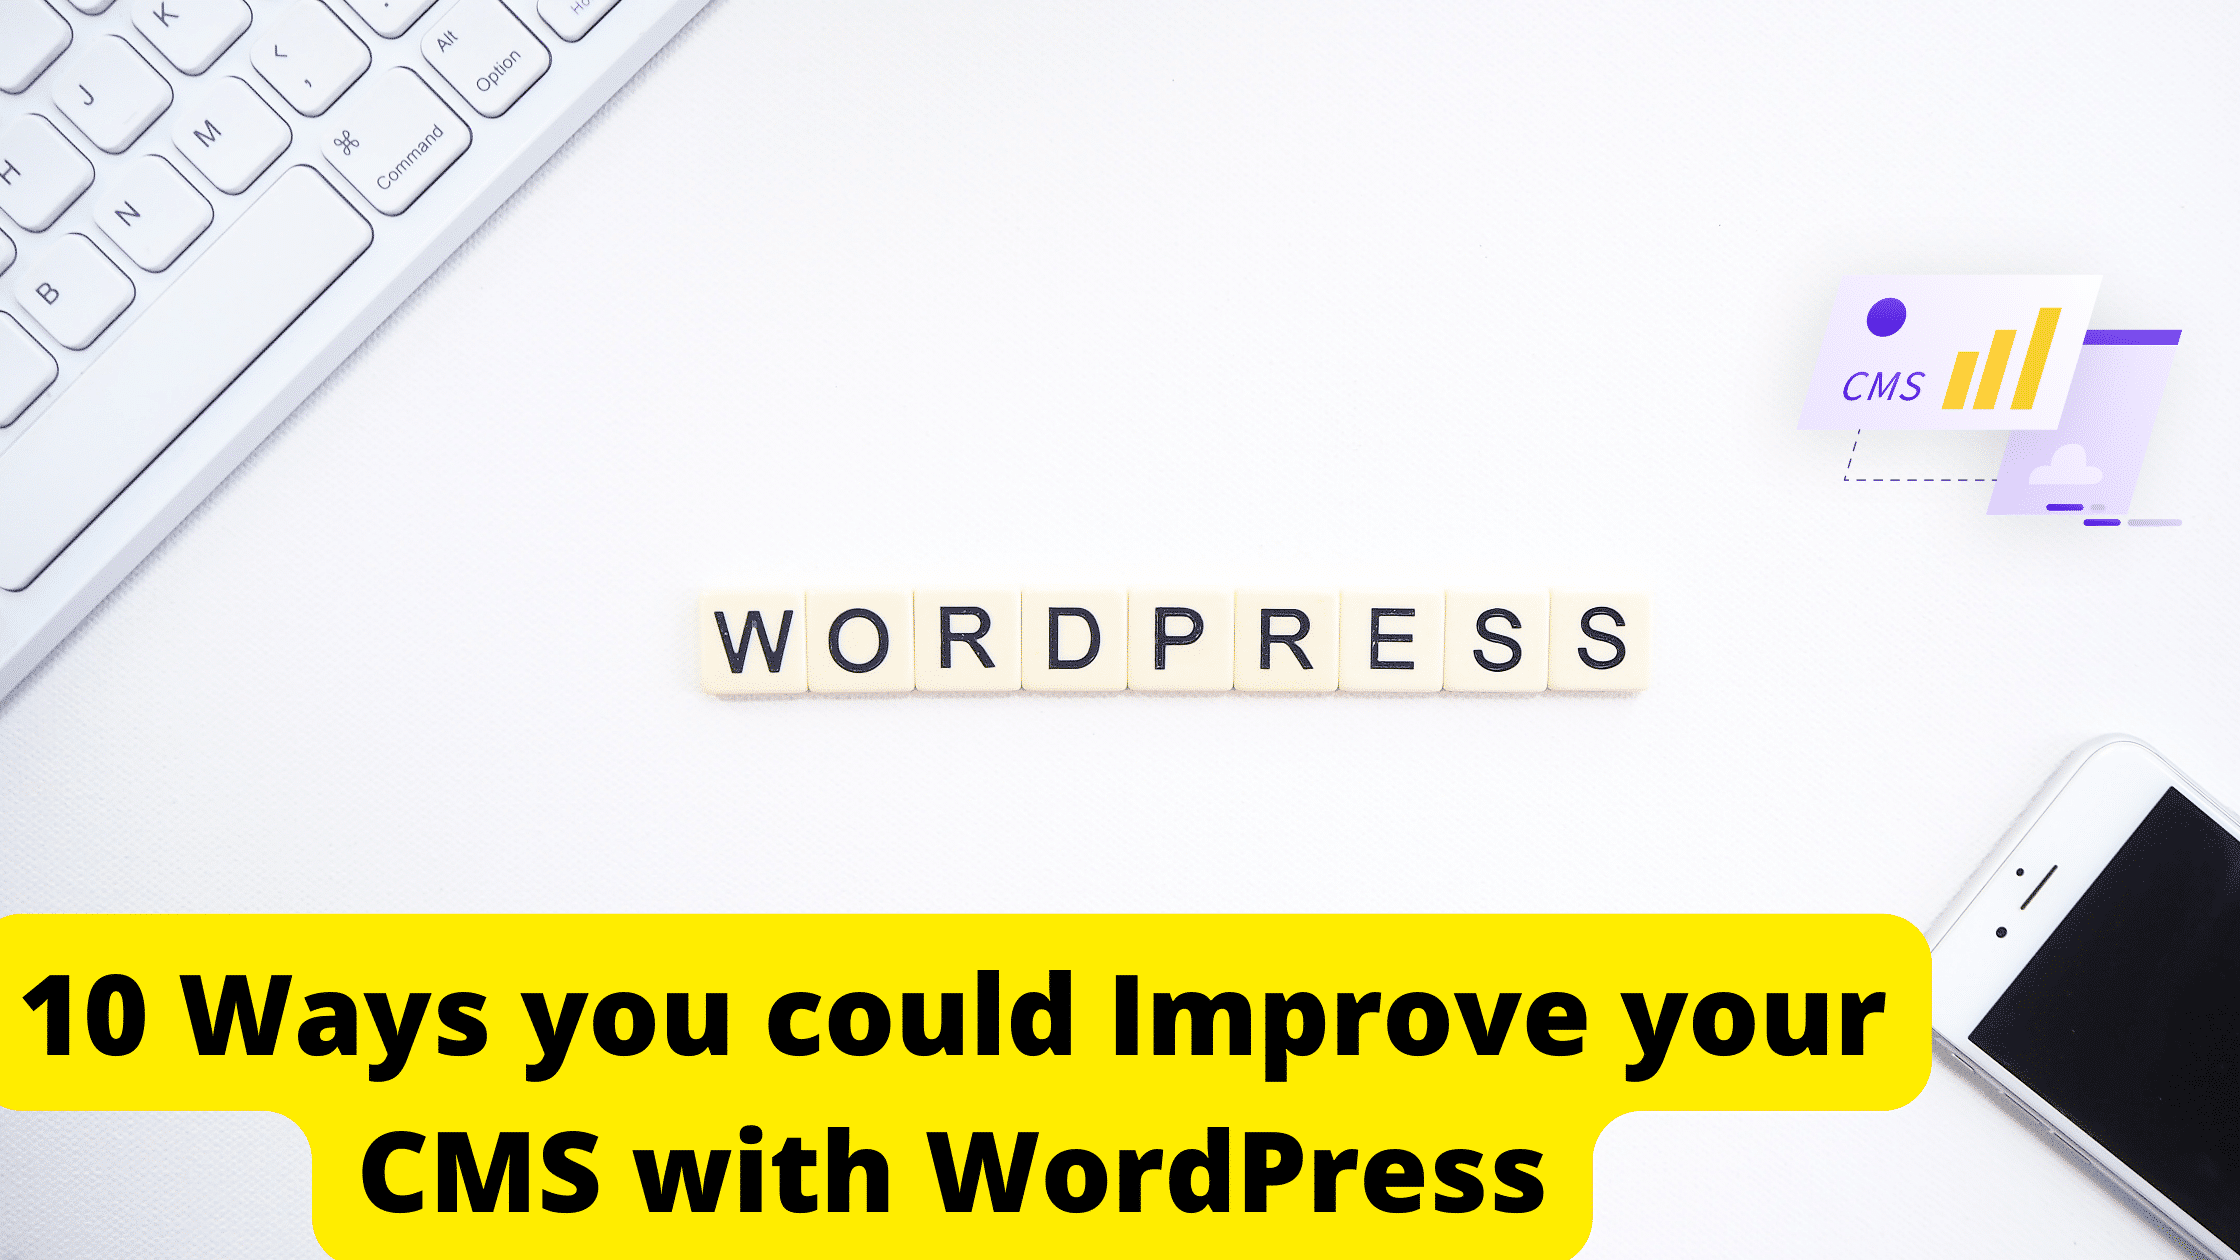 10 Ways you could Improve your CMS with WordPress